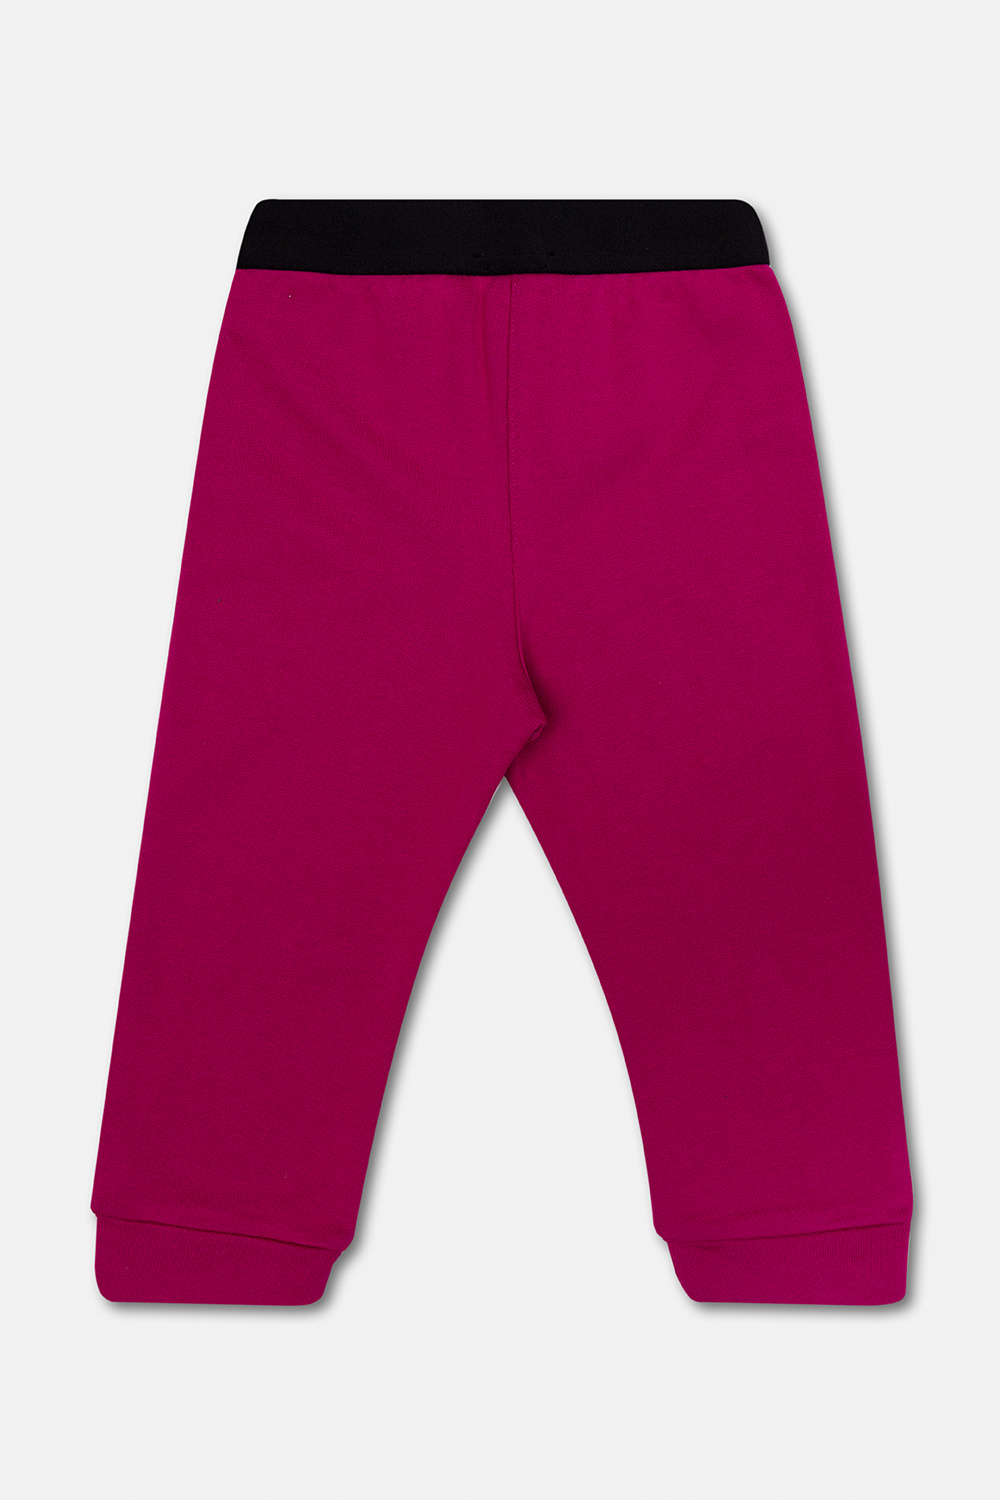 Dolce & Gabbana Kids Cotton trousers amp with logo